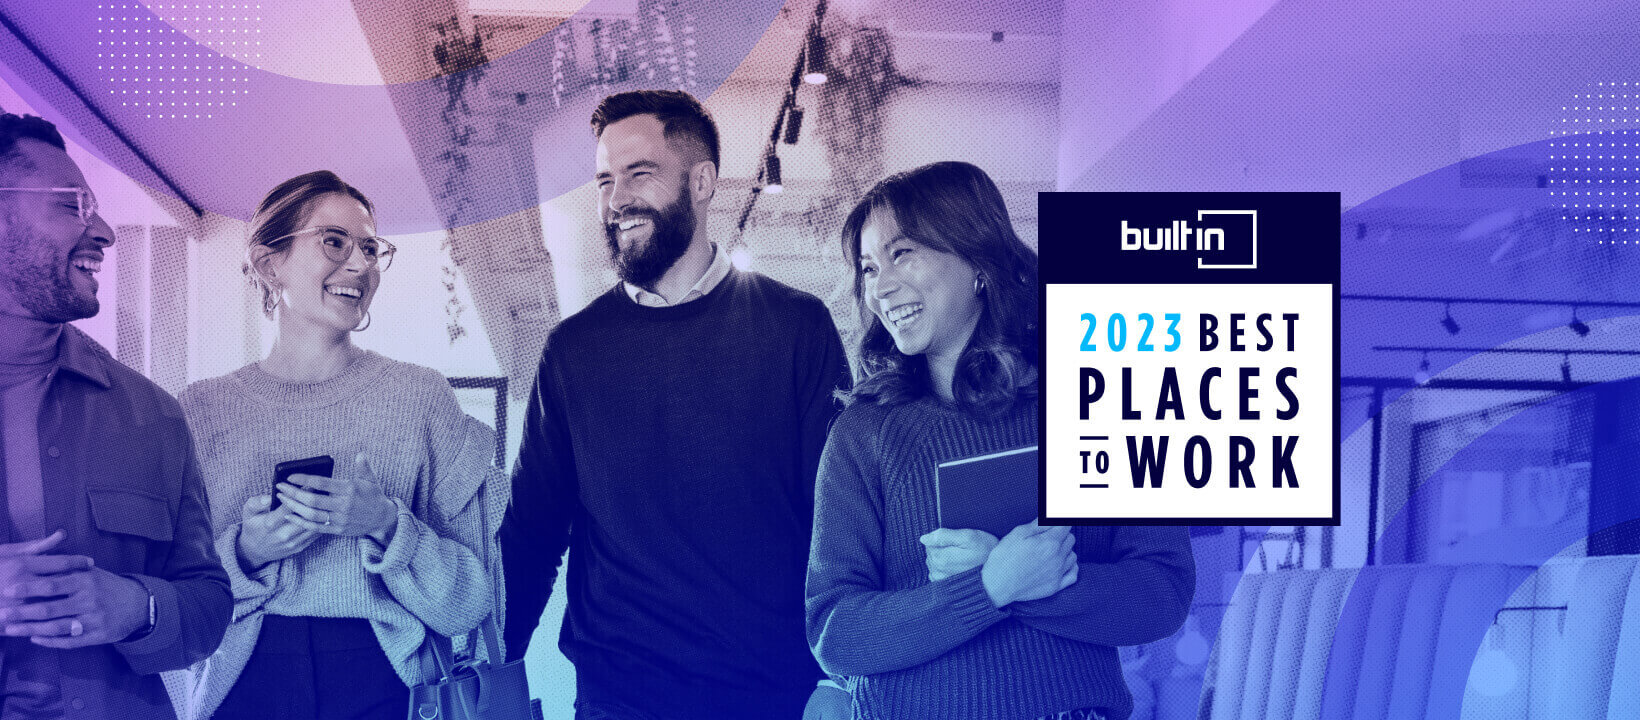 Contentsquare honored in Built In's Best Places to Work